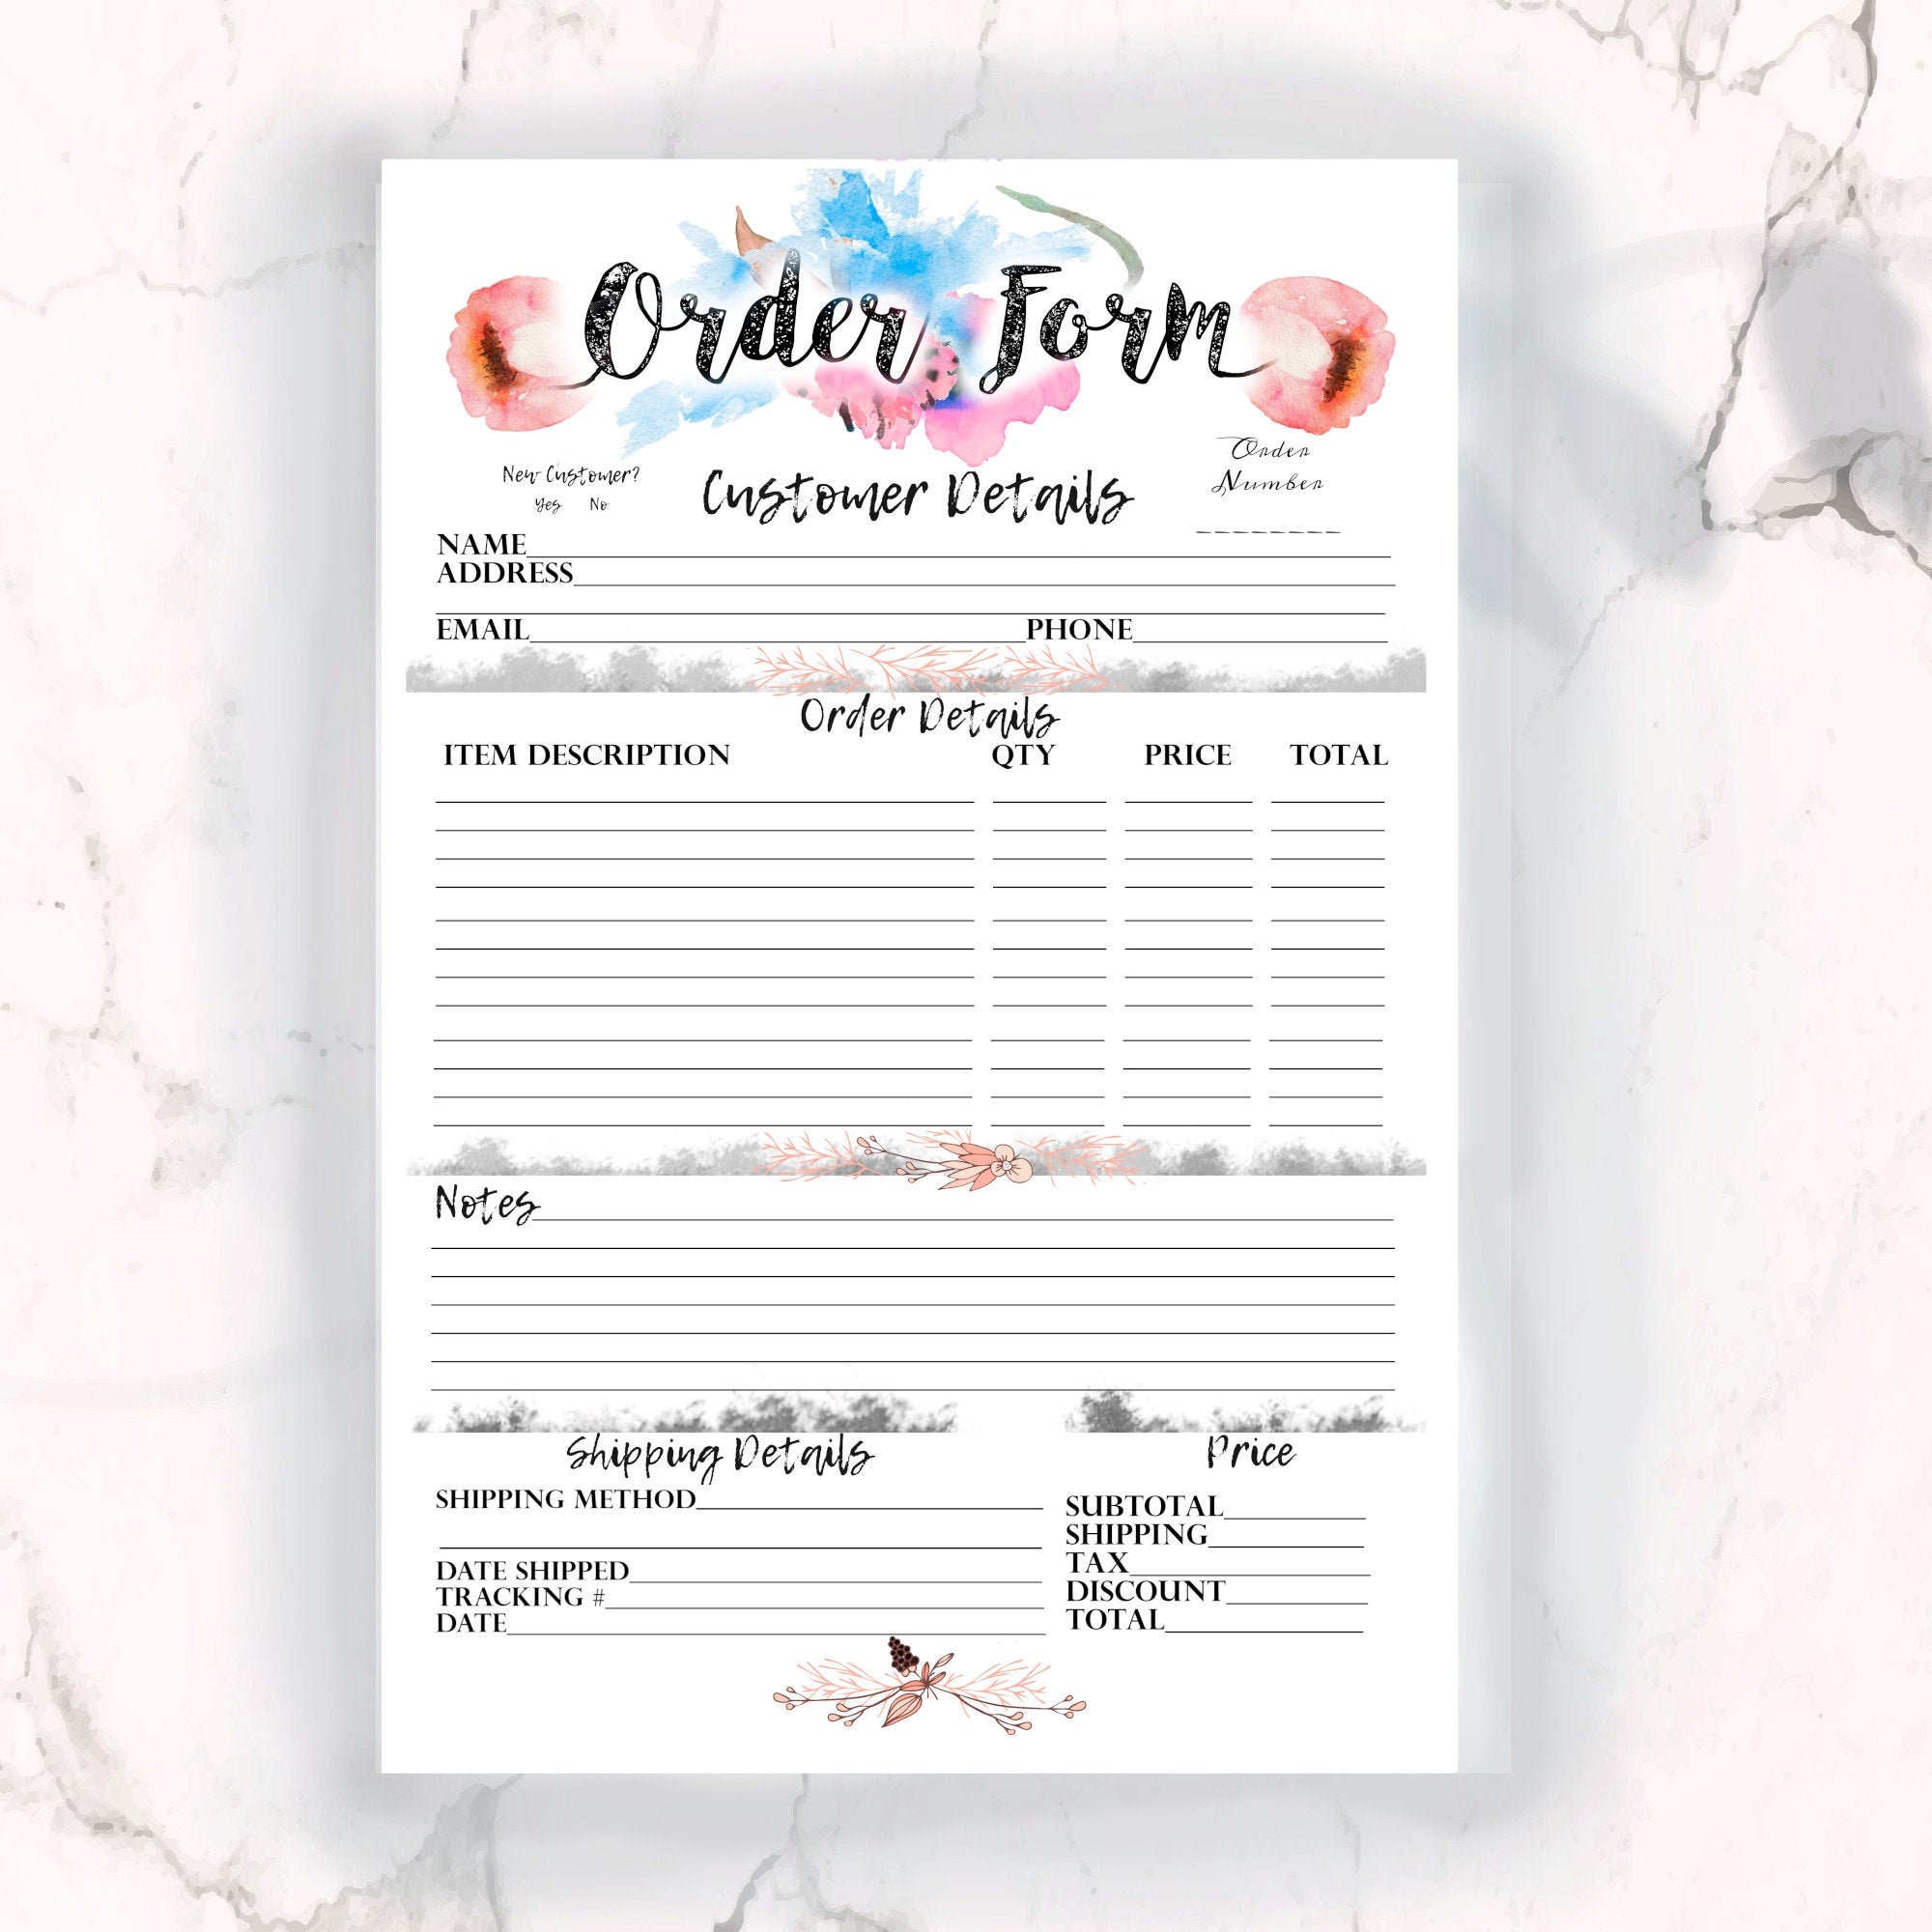 Craft Order Form Template Free